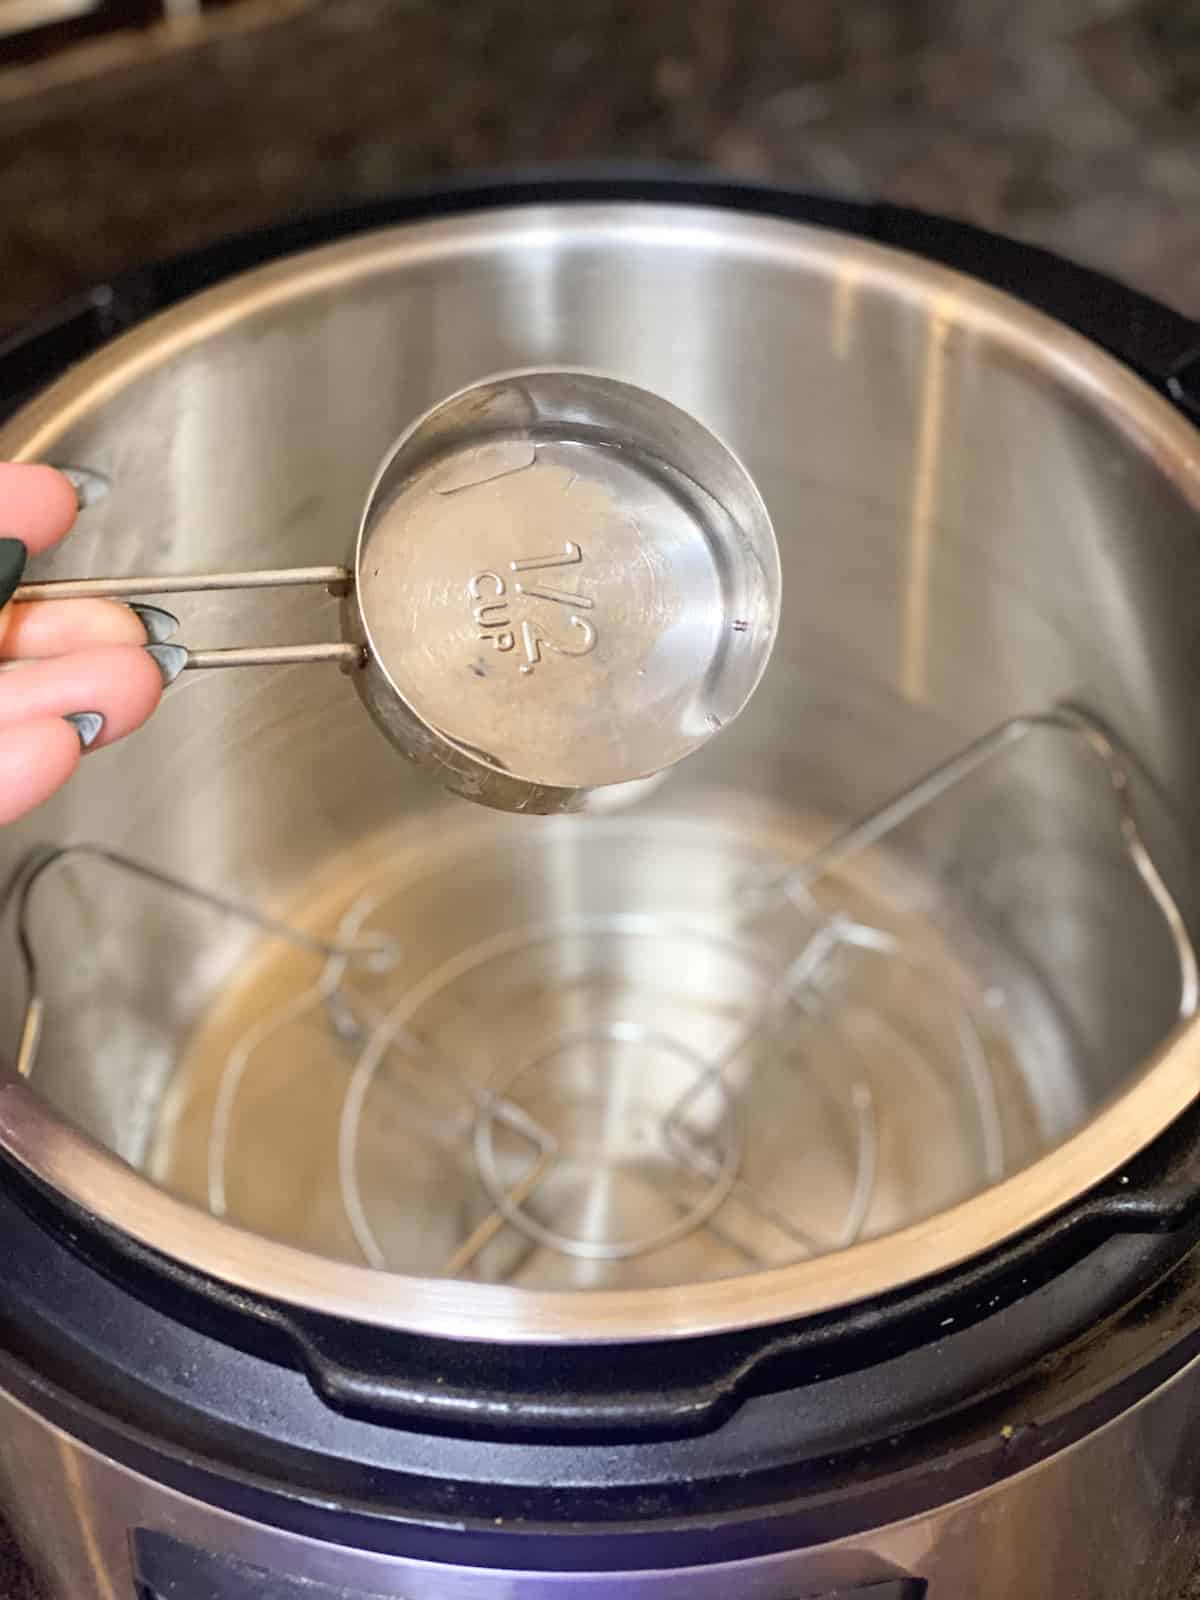 Water being poured into an instant pot